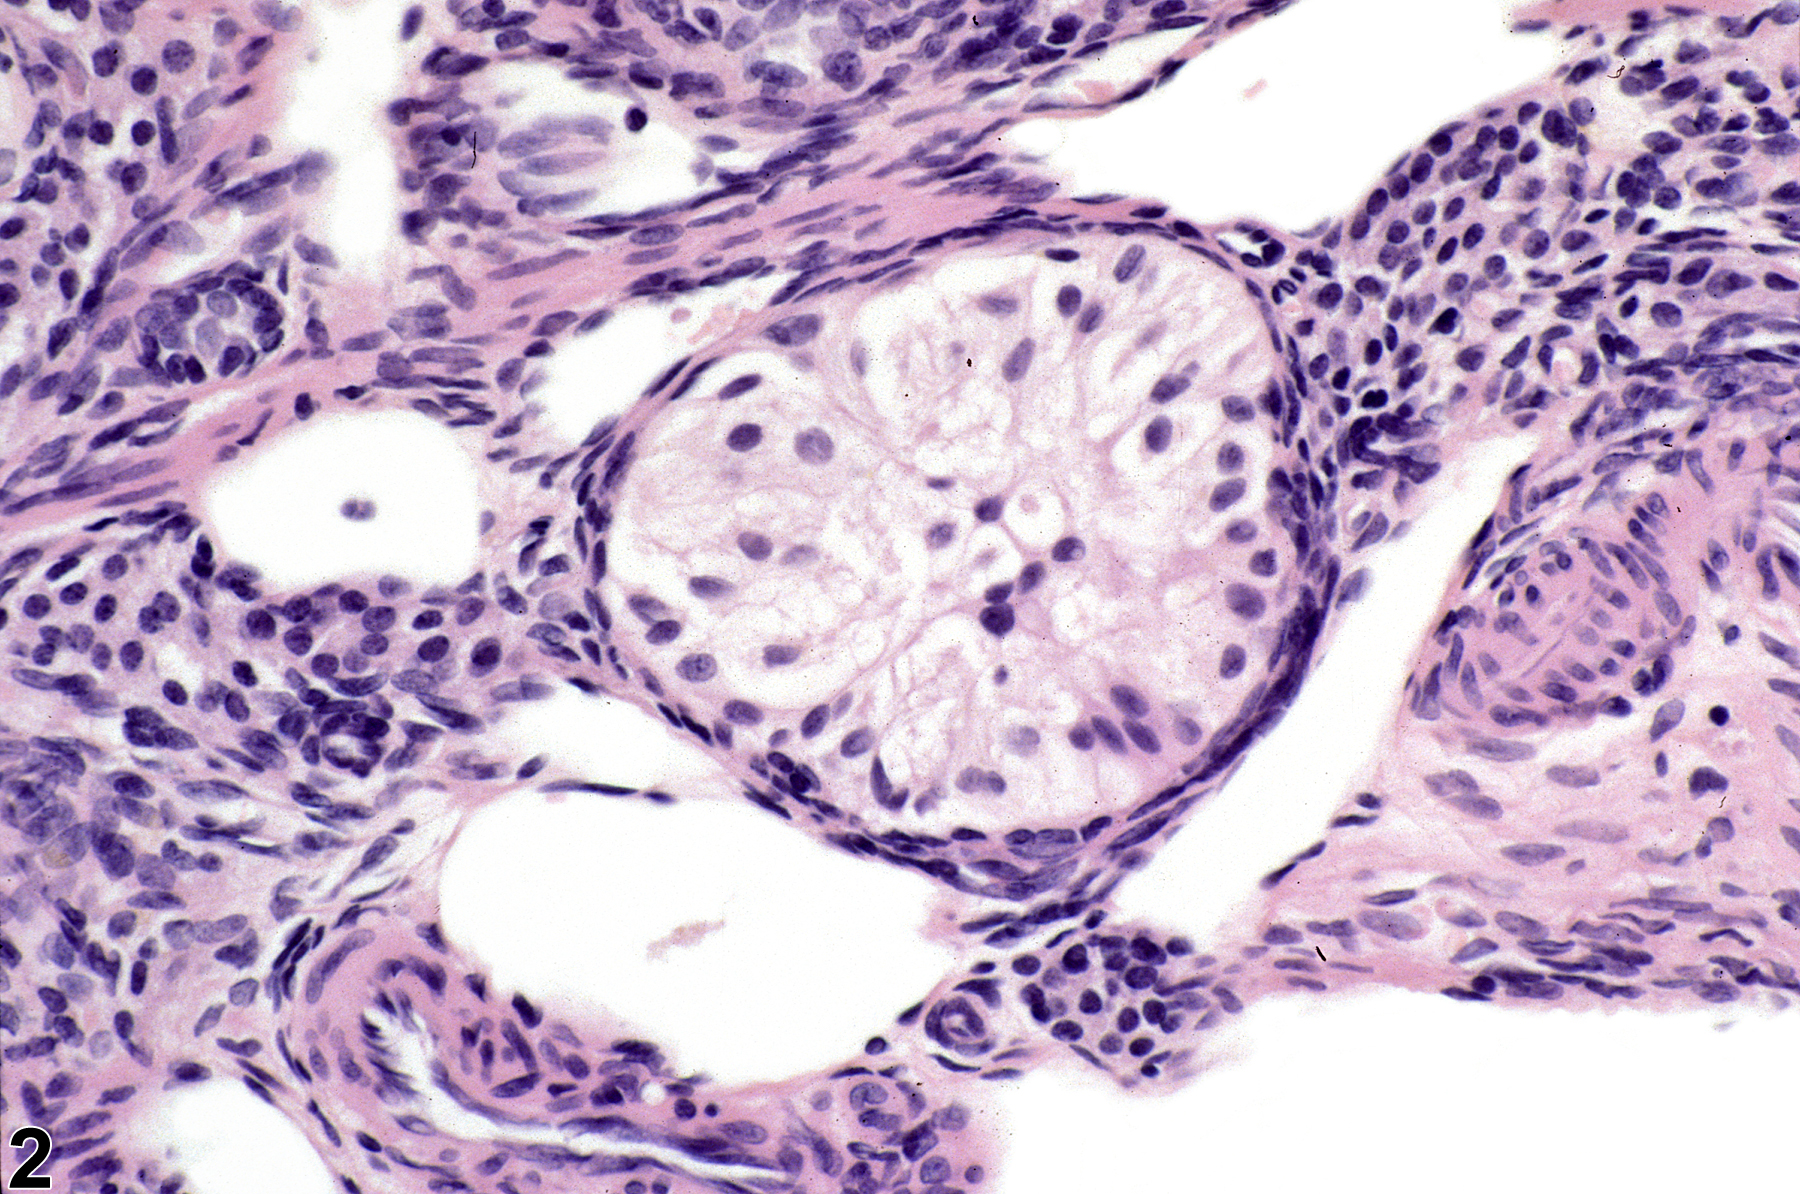 Image of hyperplasia, sertoliform in the ovary from a female F344/N rat in a chronic study